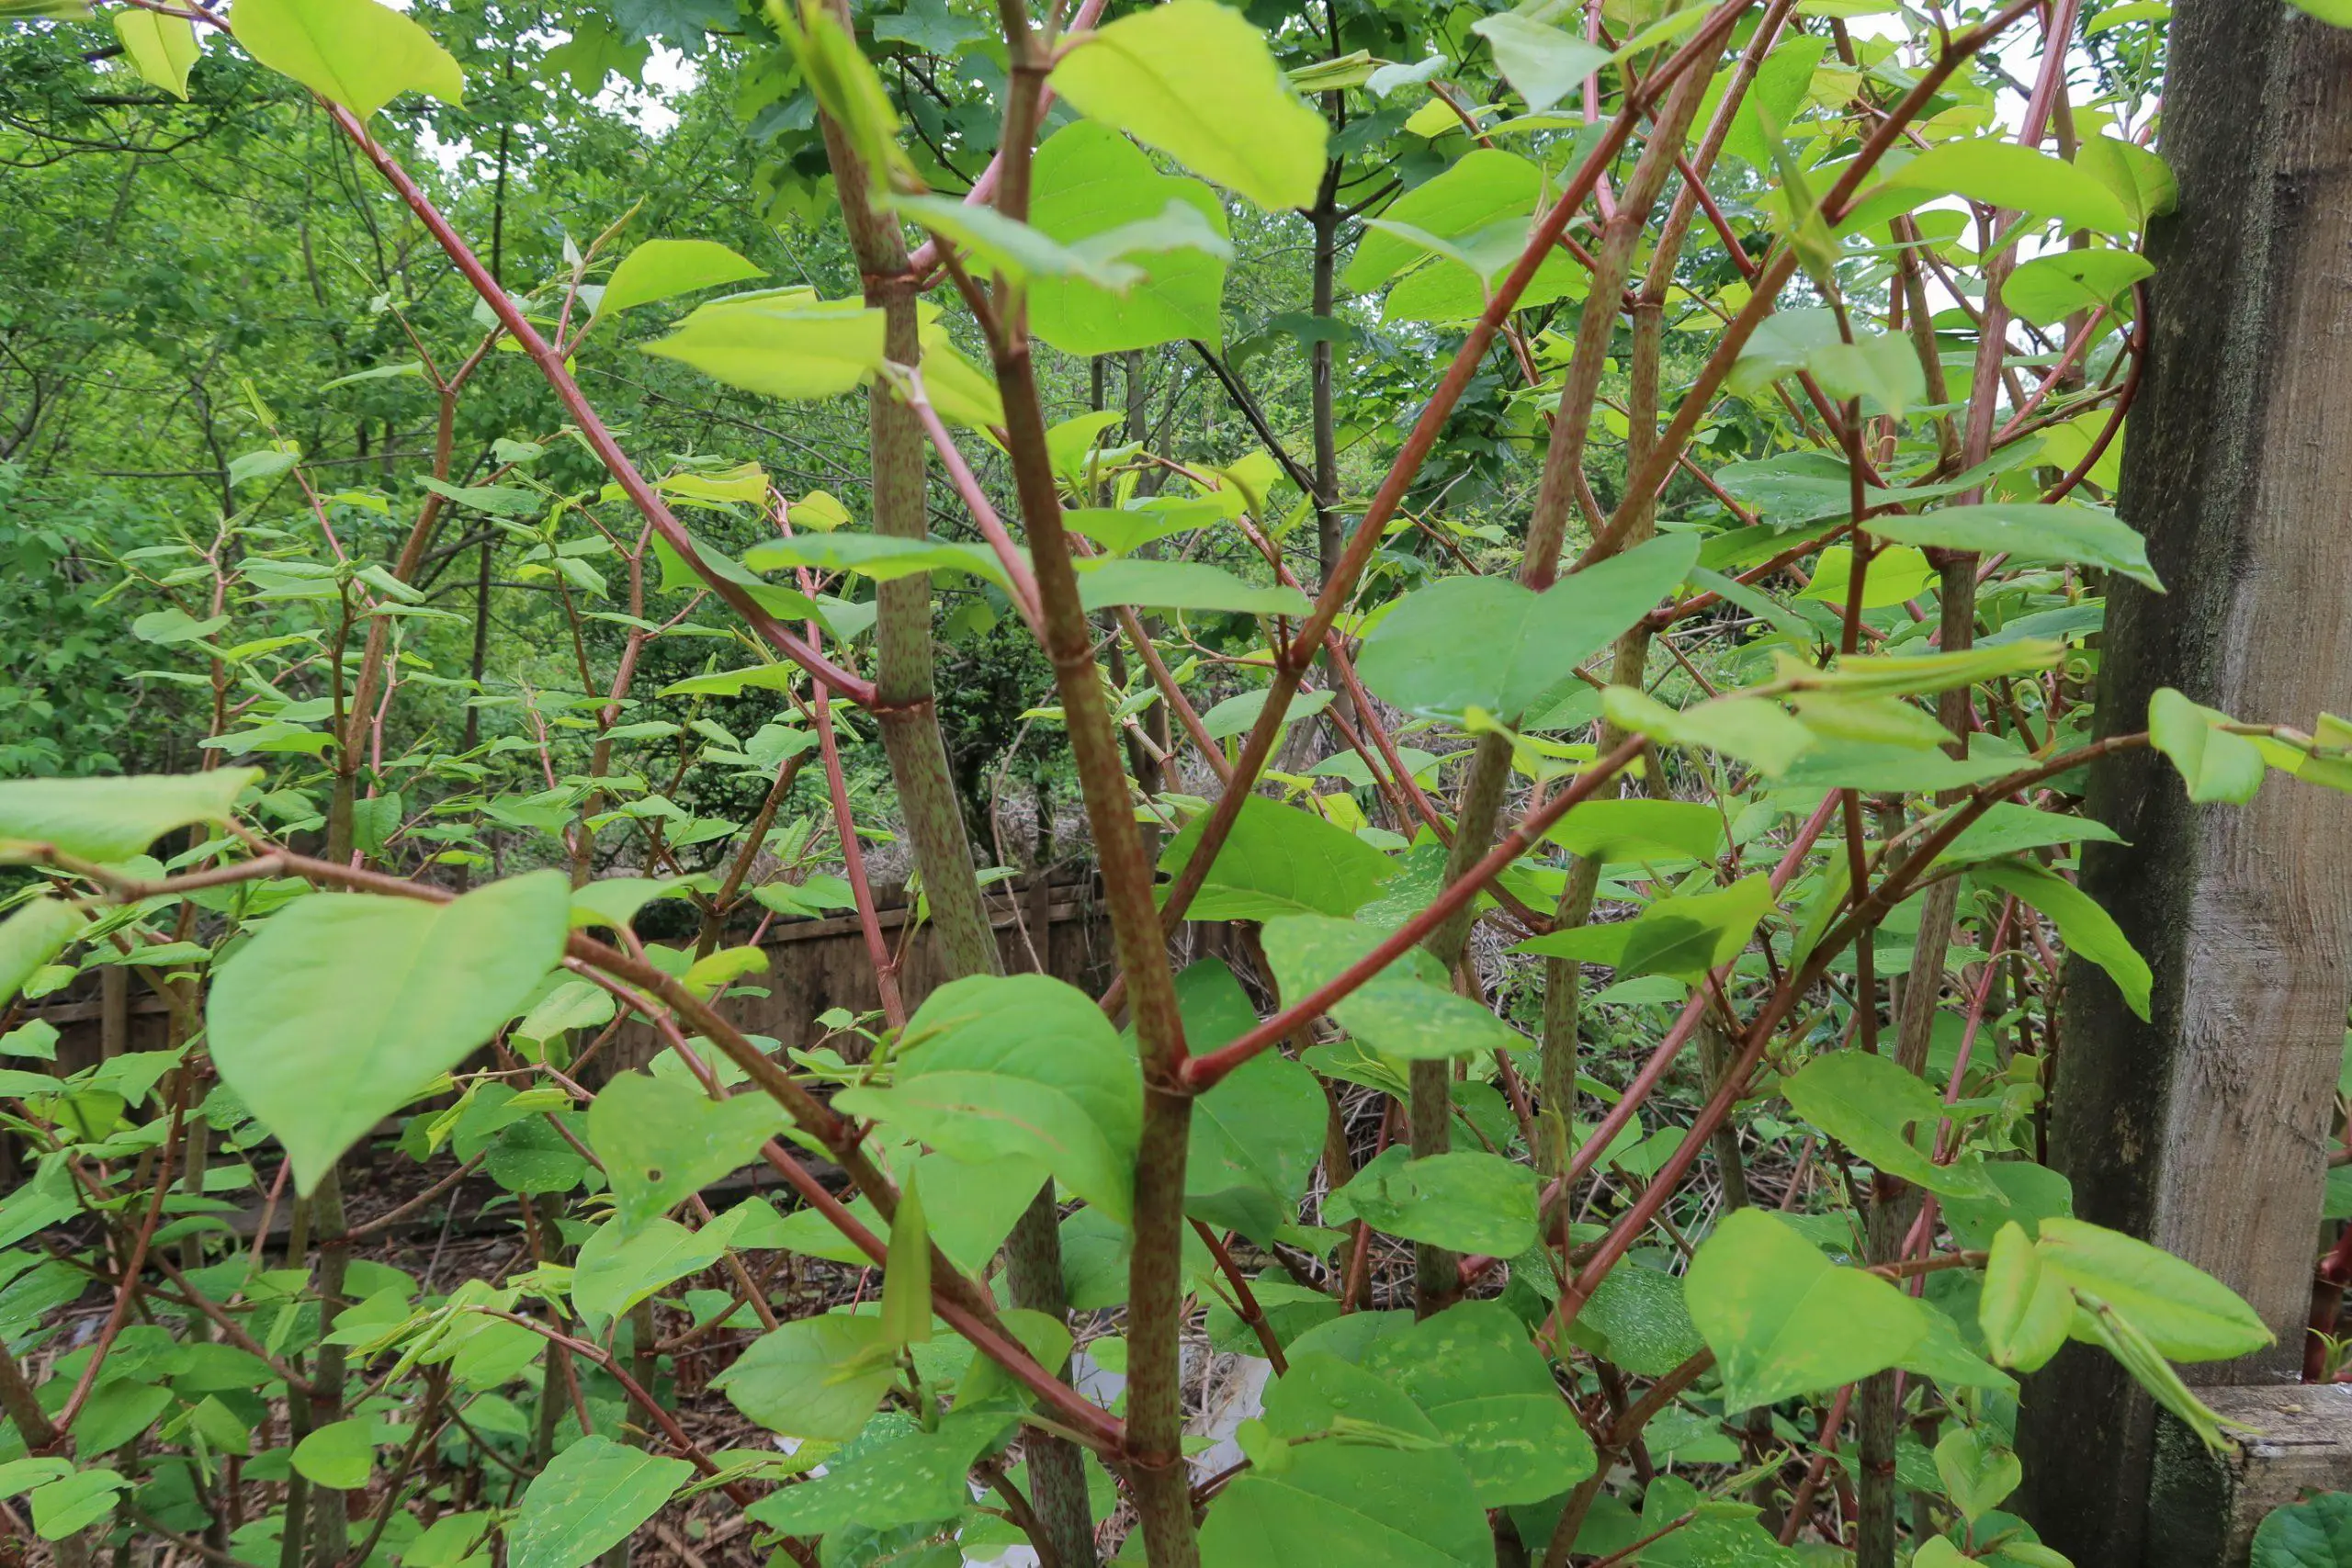 Preventing the spread of Japanese knotweed is vital to gain control and reclaim your garden